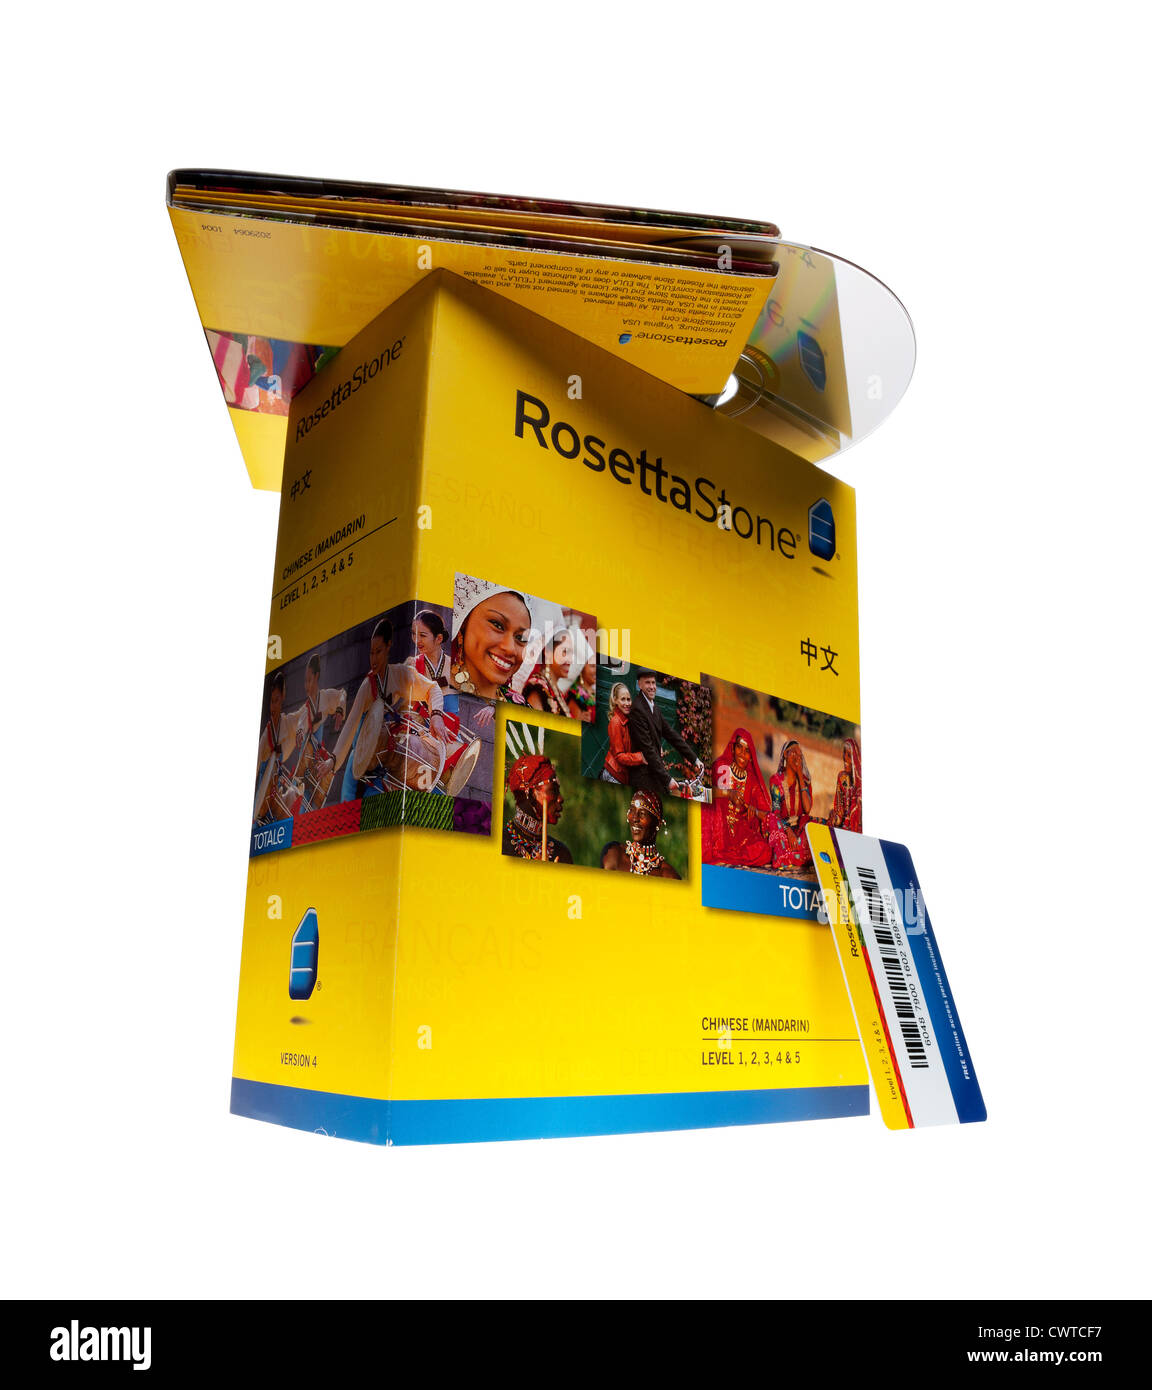 Rosetta Stone language learning software Banque D'Images